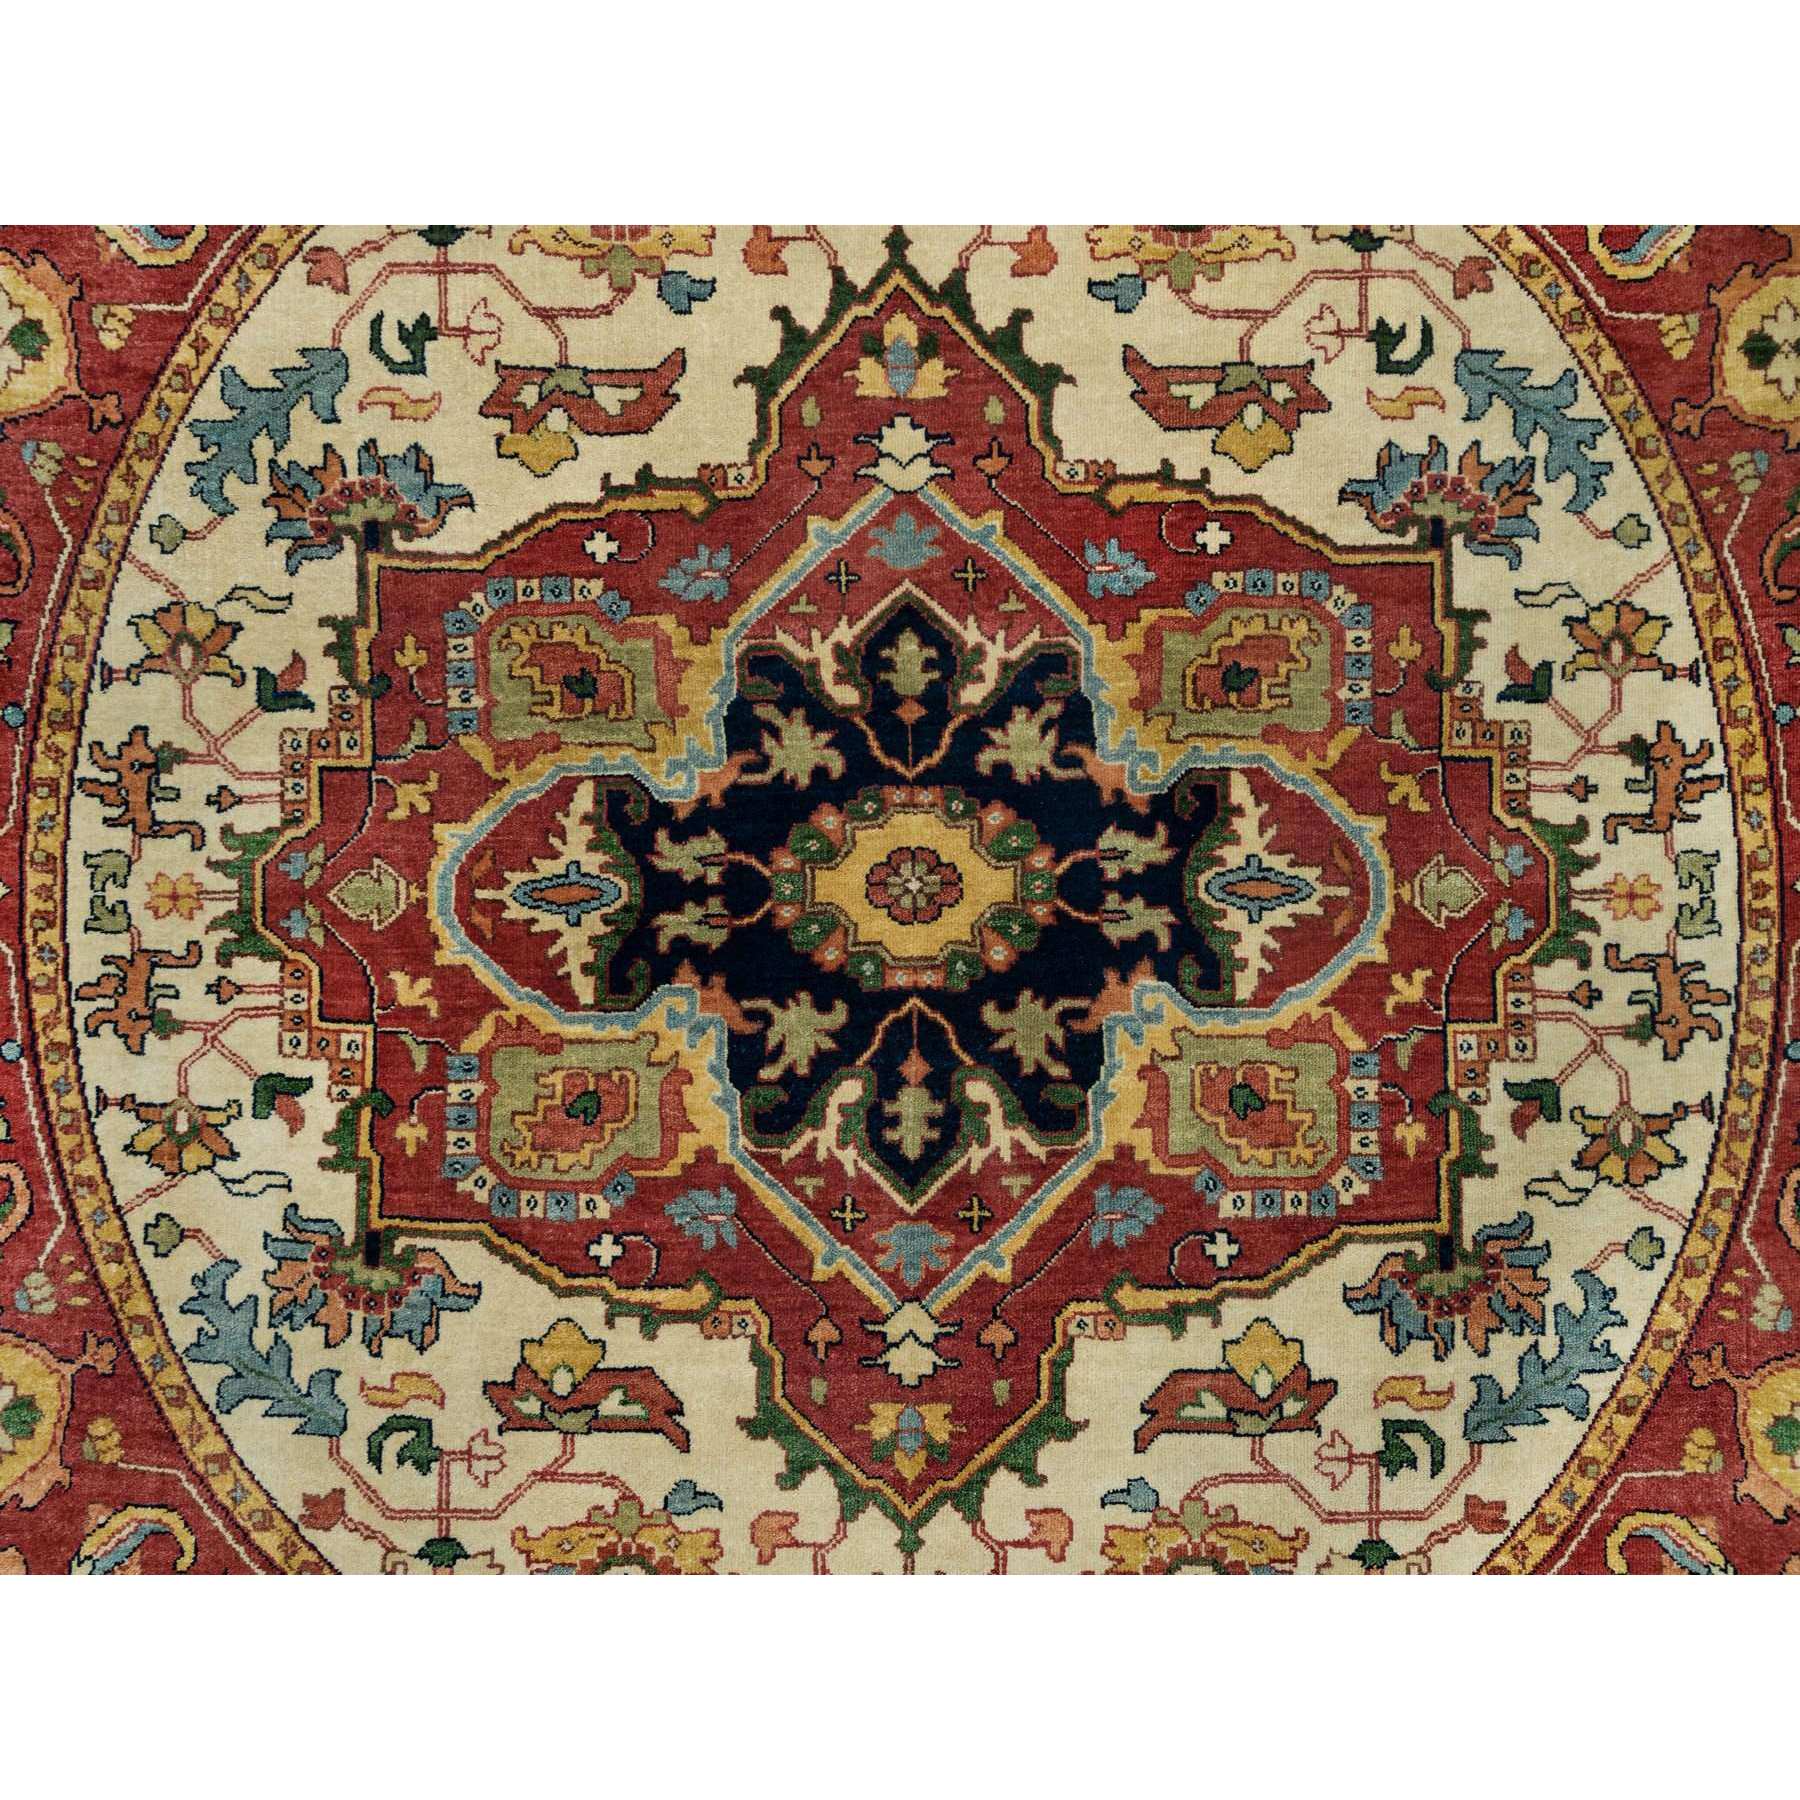 6'x6' Abbey White and Prune Red, Dense Weave, Lush Pile, Vegetable Dyes, Antiqued Fine Hand Woven Heriz Re-Creation, Round Oriental Rug 